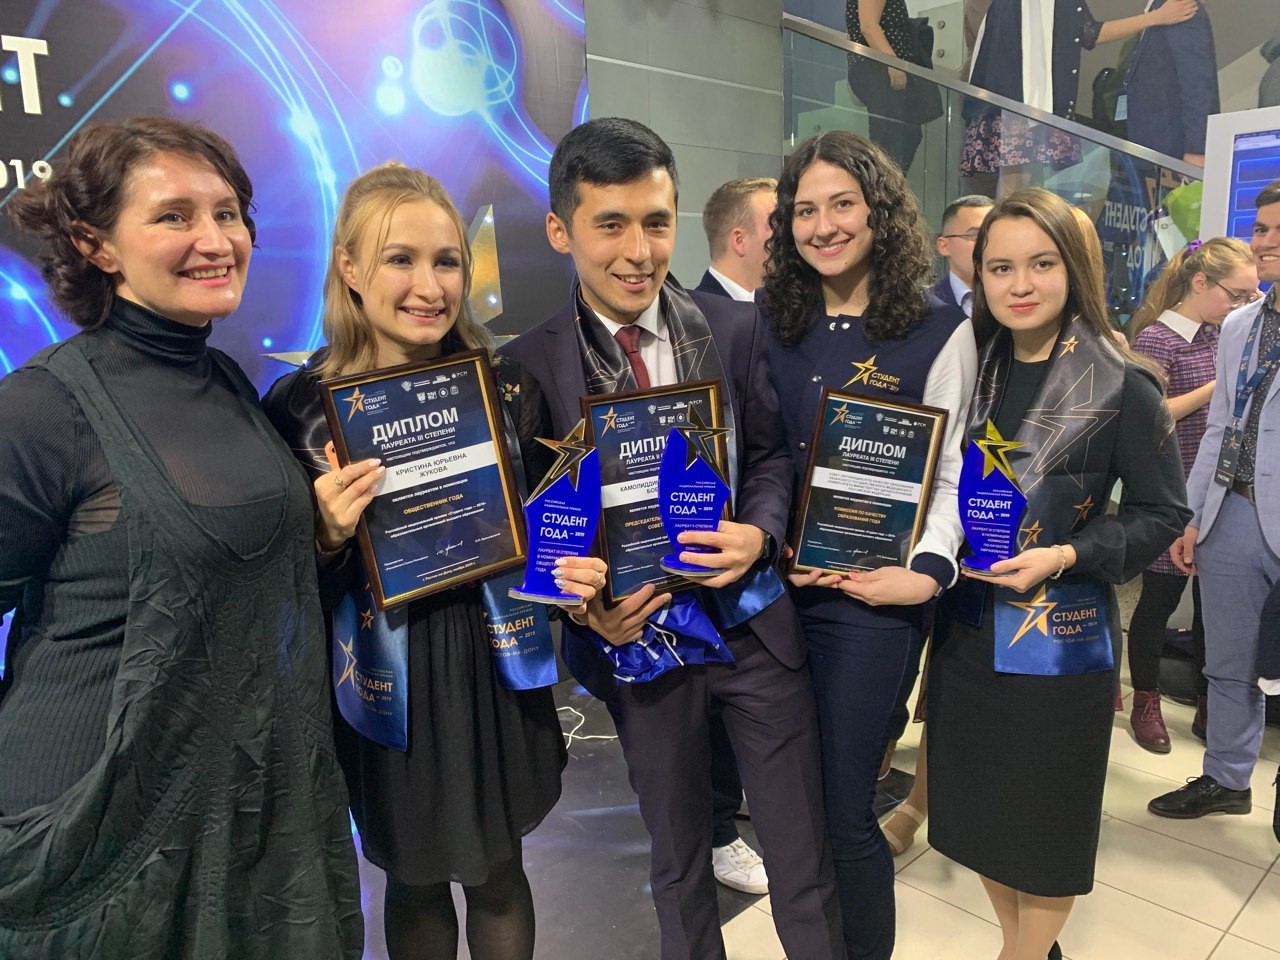 KFU students are among the winner of Russian Student of the Year 2019 ,Ministry of Science and Higher Education of Russia, Ministry of Enlightenment of Russia, Federal Agency for Youth Affairs, Government of Rostov Oblast, Russian Youth Union, Russia Country of Opportunities, Student of the Year